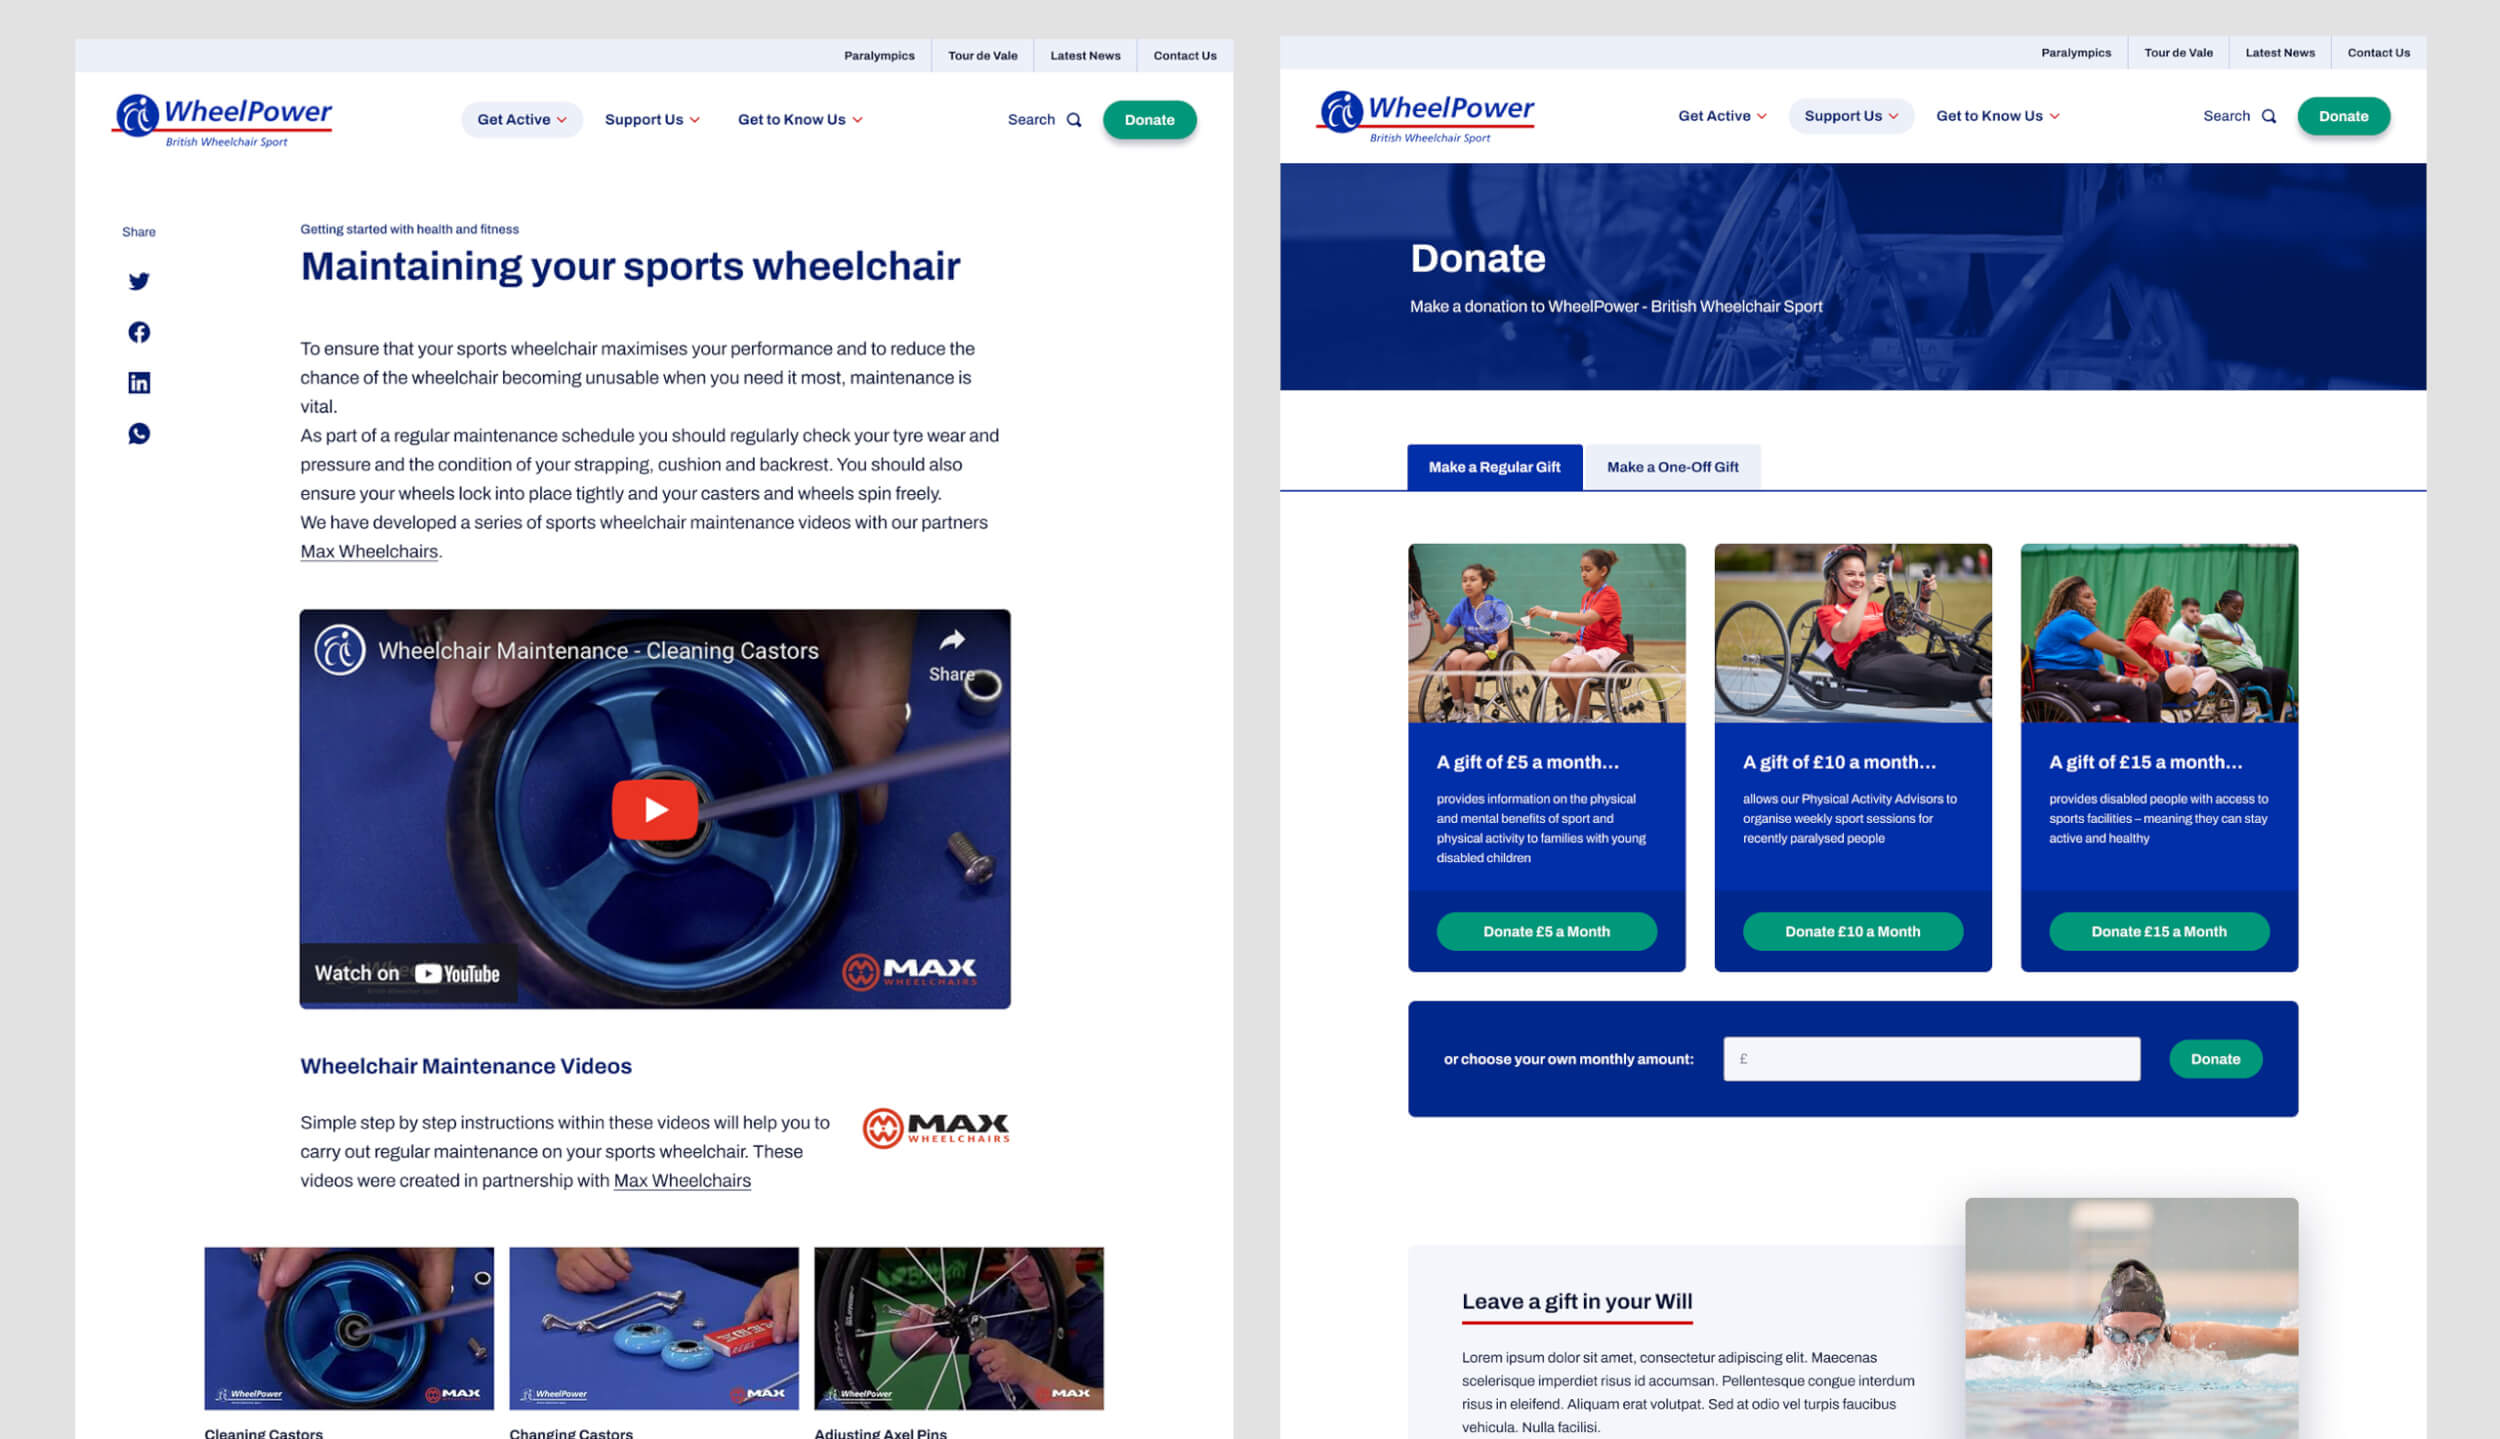 WheelPower website pages in detail side by side showing lower level pages